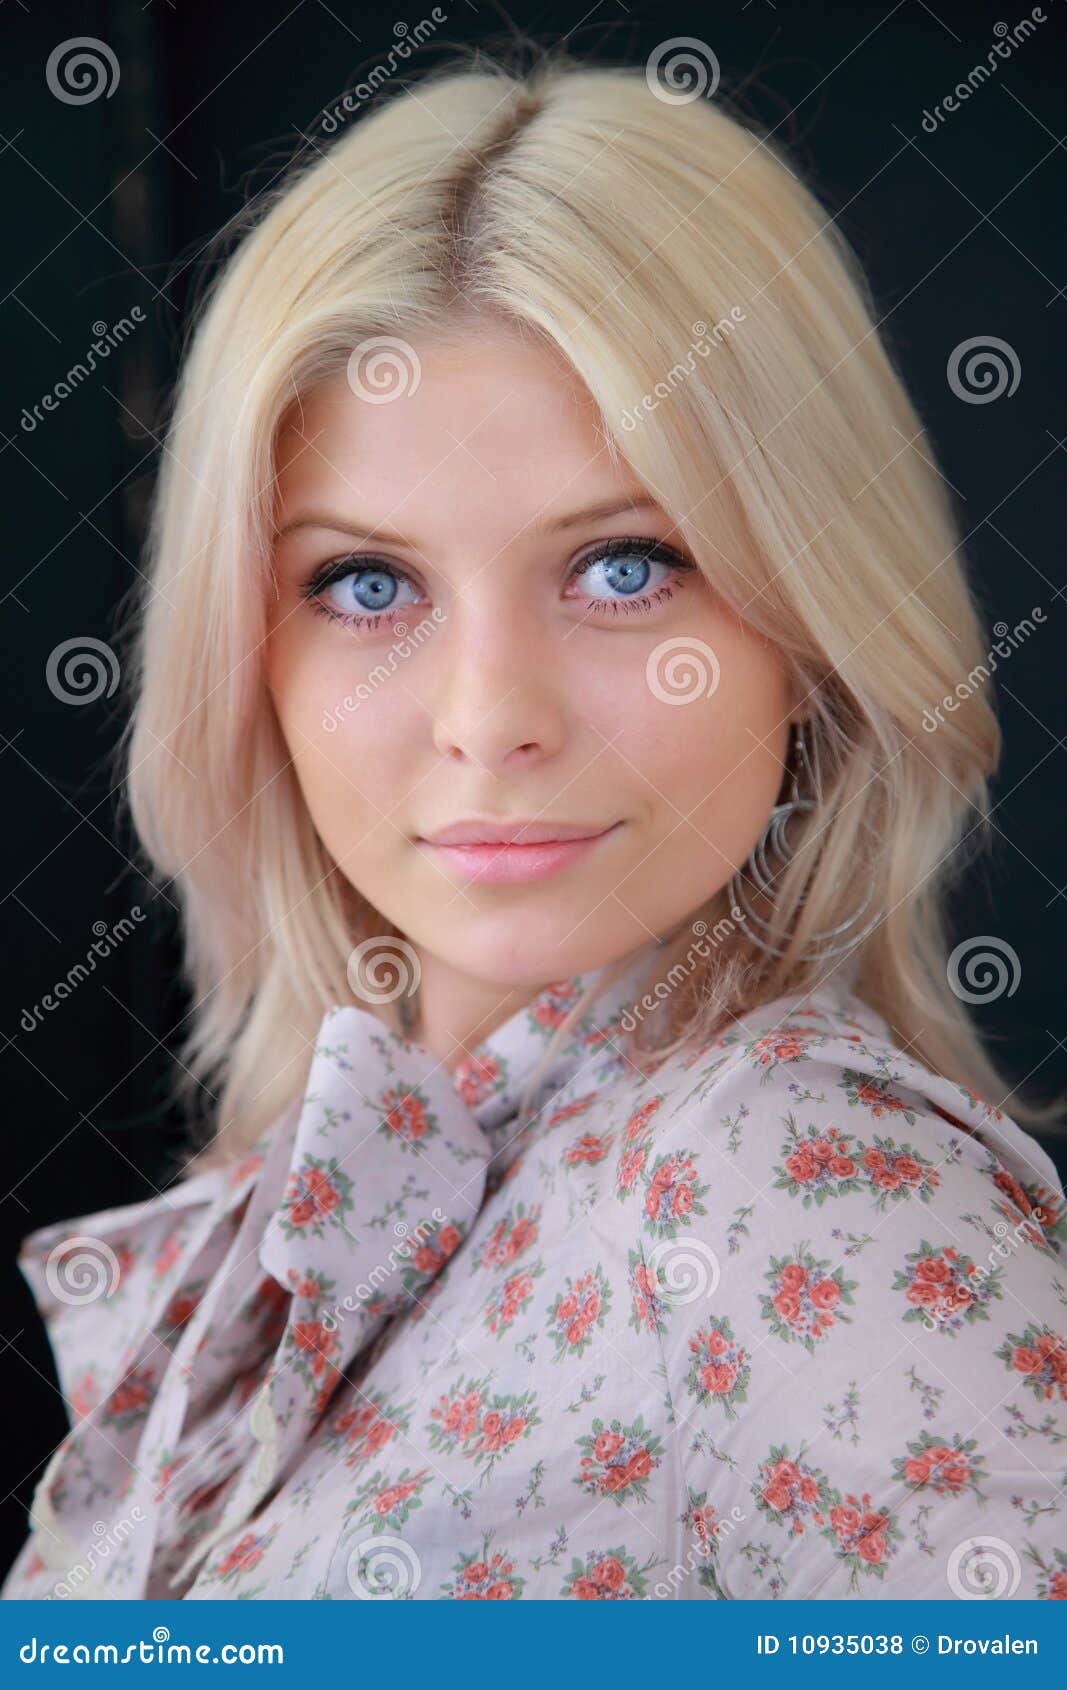 The Gentle Blonde With Blue Eyes Stock Photo - Image: 10935038